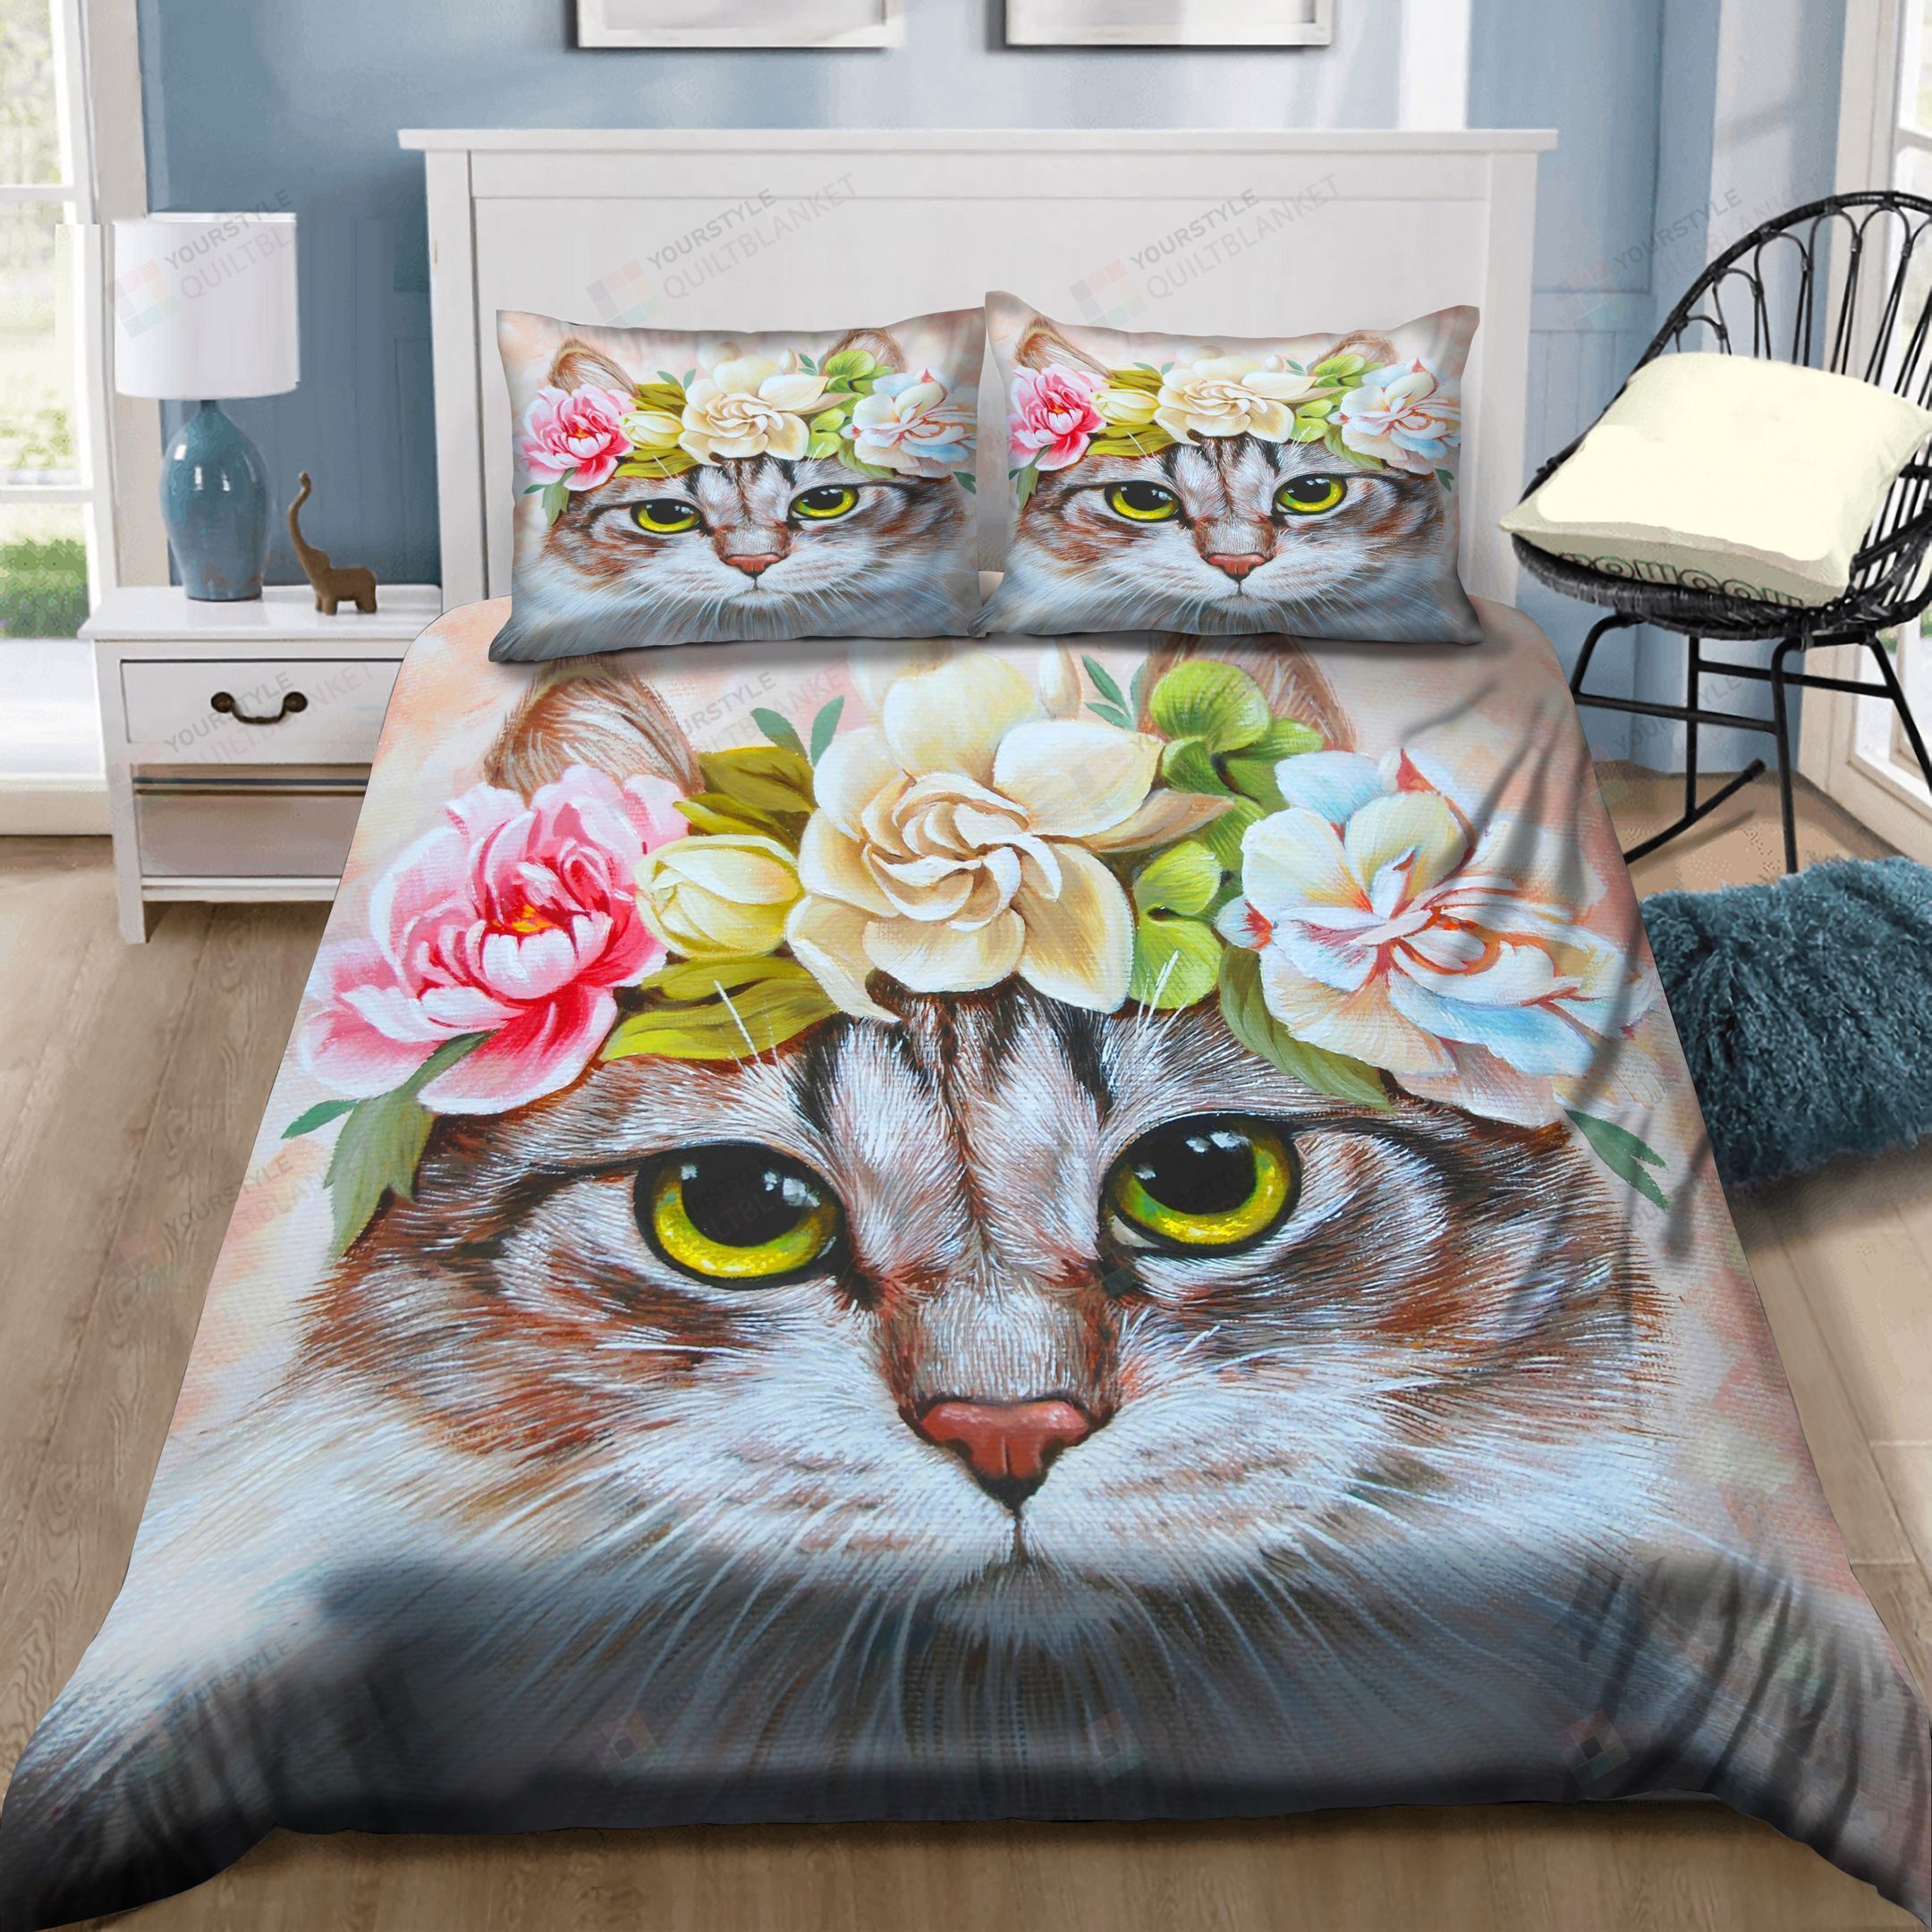 Cute Cat With Flowers Bedding Set Bed Sheets Spread Comforter Duvet Cover Bedding Sets